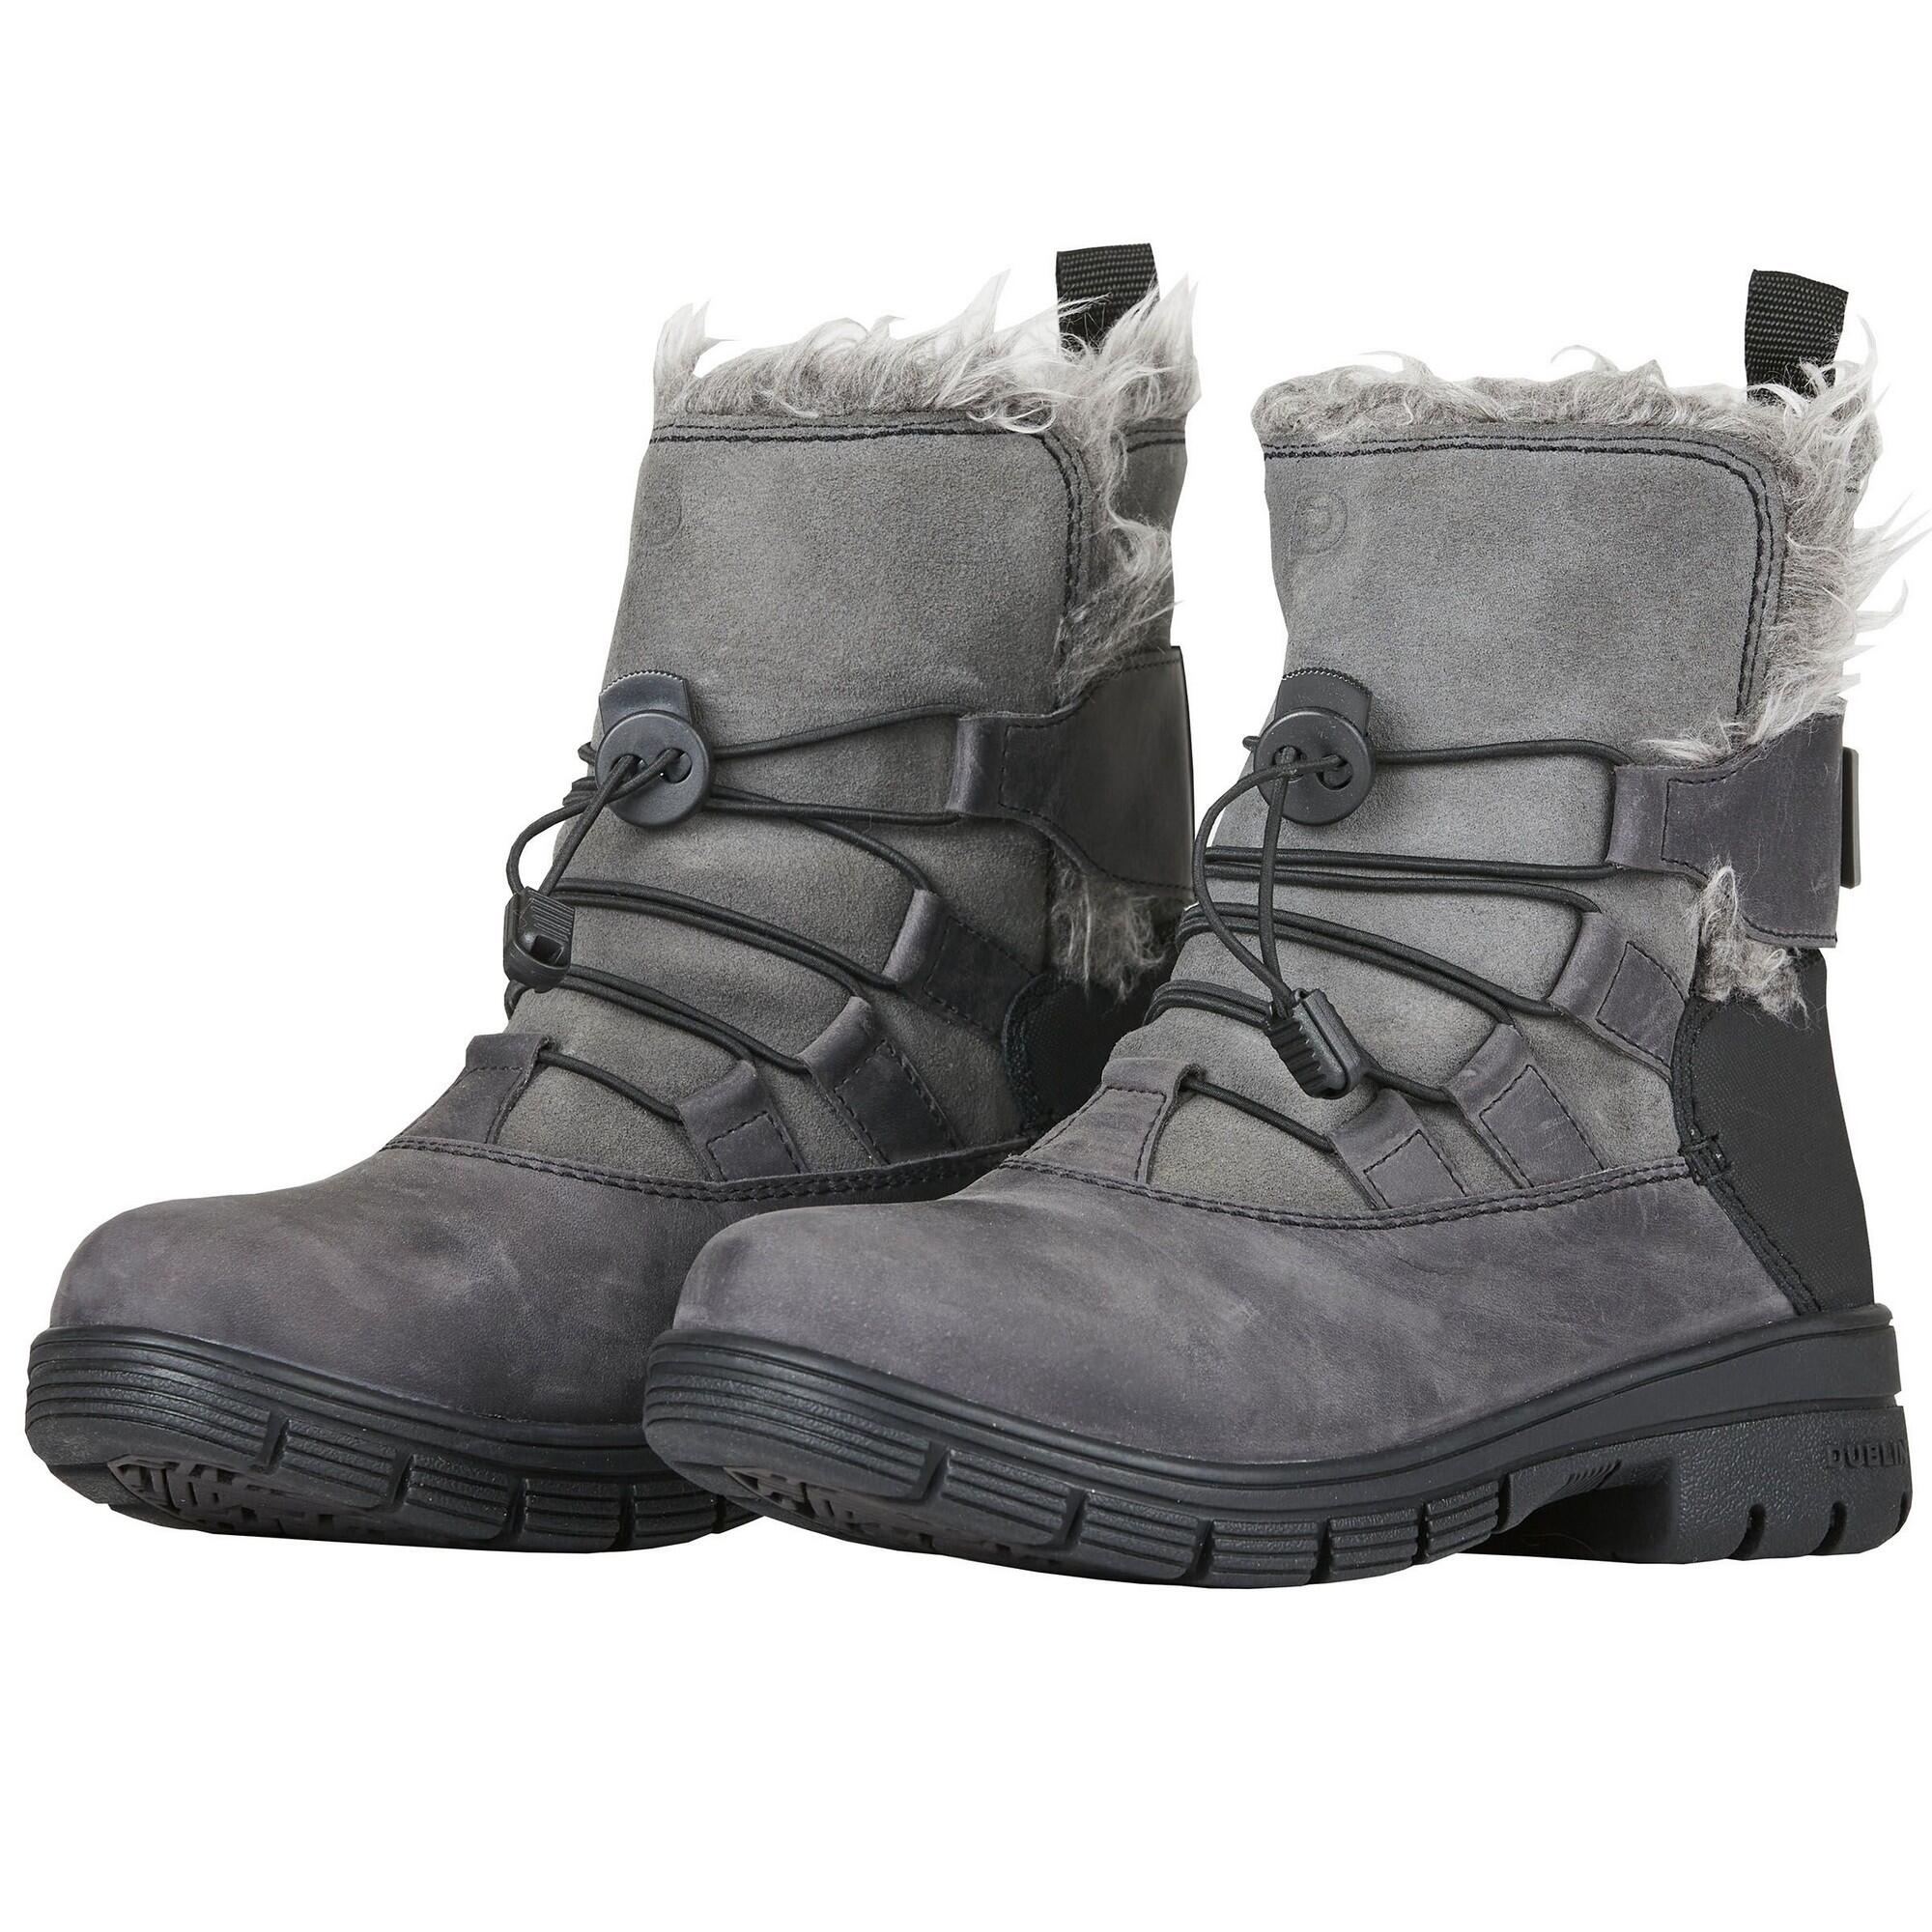 Unisex Adult Boyne Leather Country Boots (Grey) 1/4